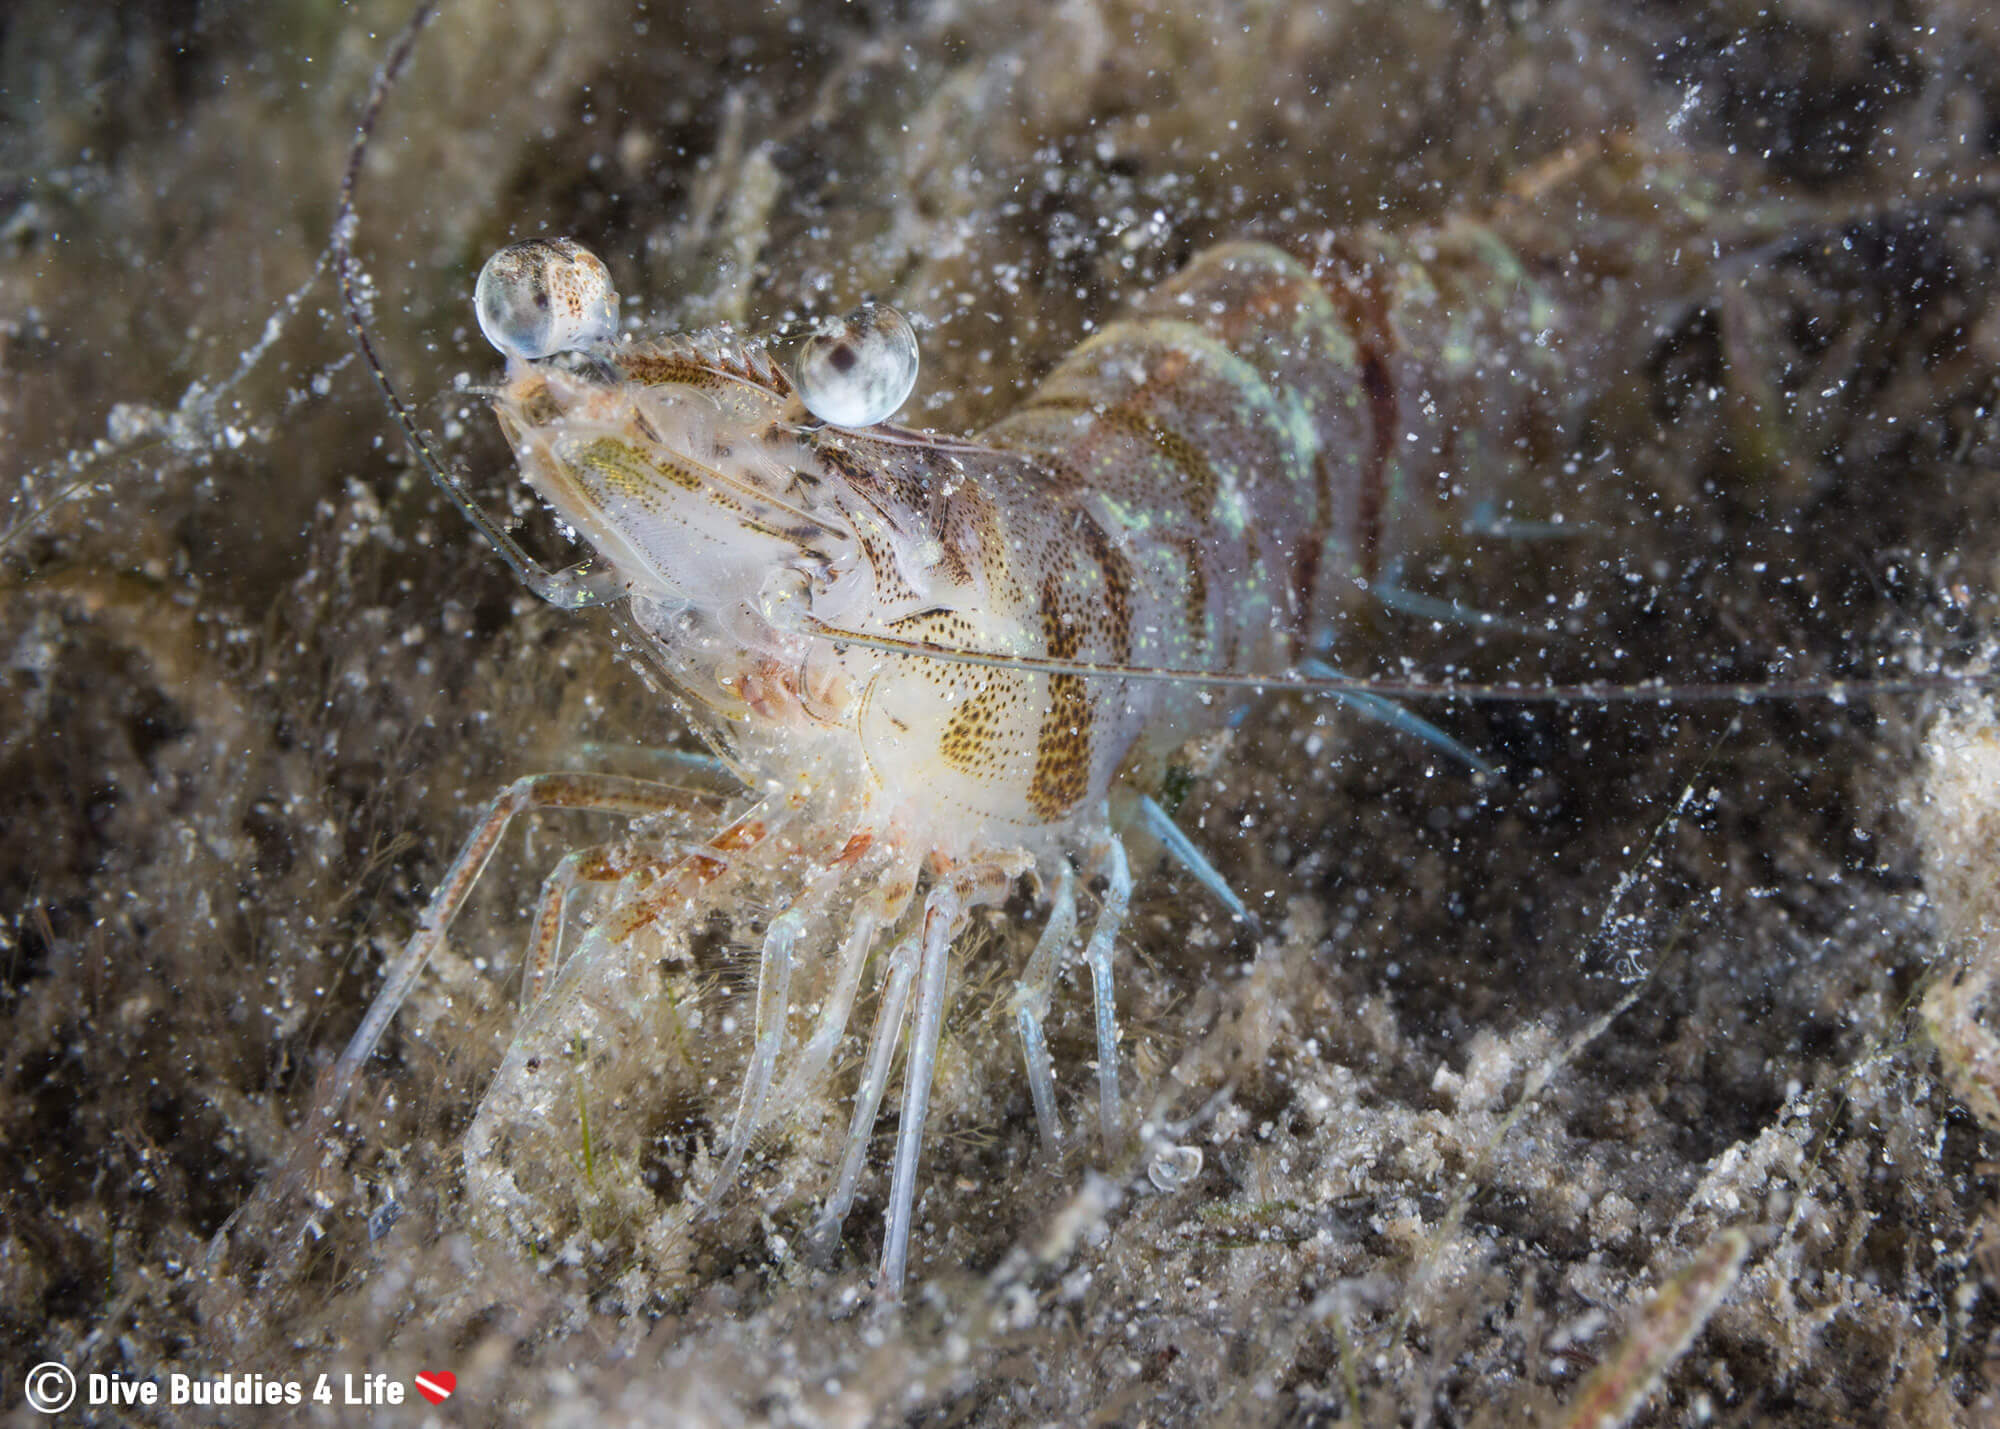 A Sand Shrimp Digging In The Mud At The Bridge In Florida, USA